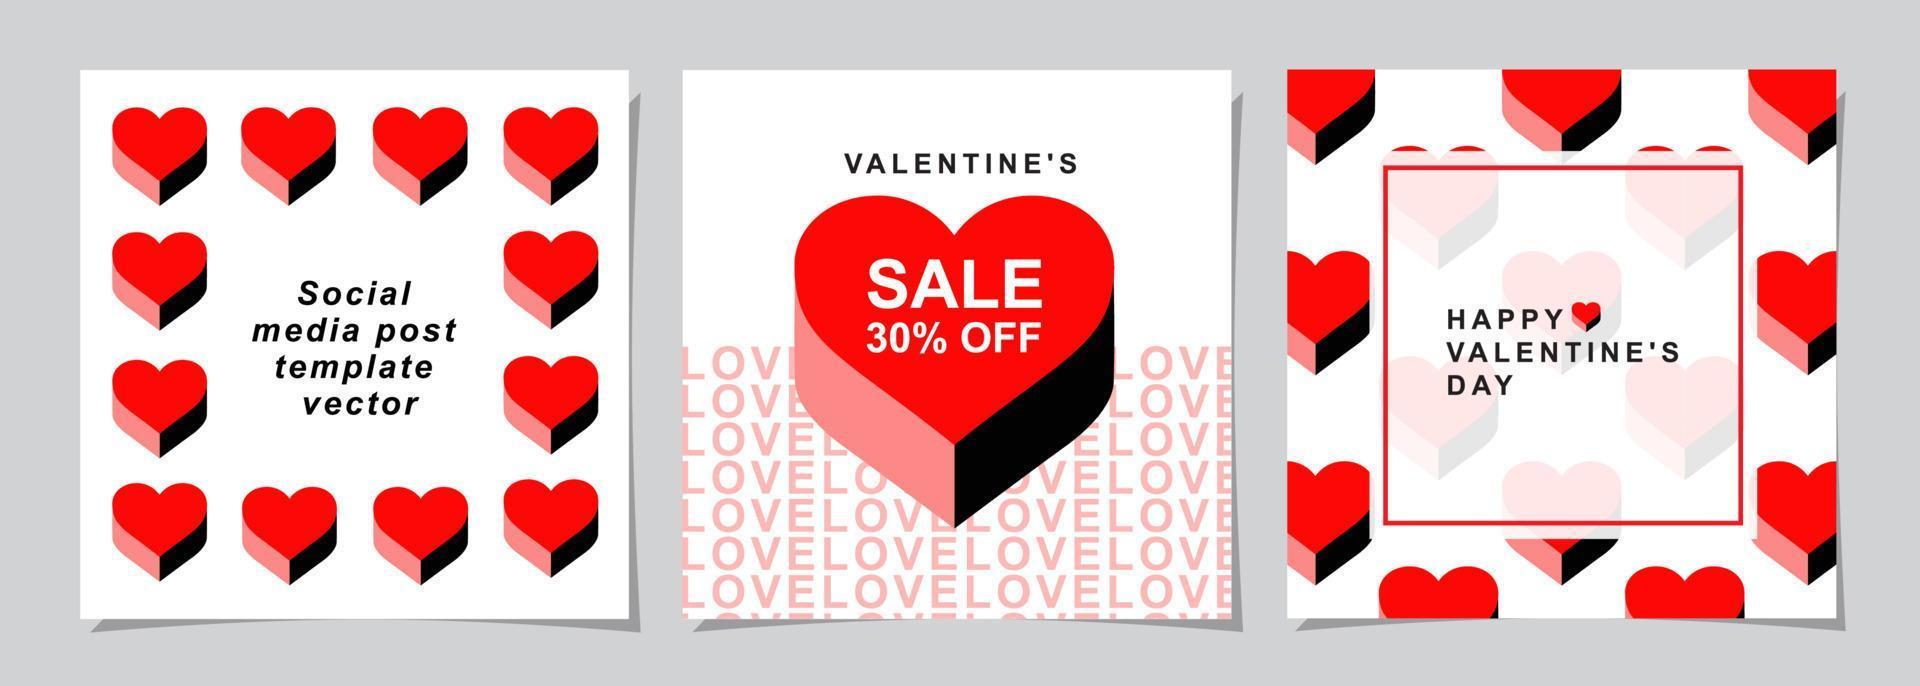 Valentines Day square banner for social media posts, mobile apps, banners, digital marketing, sales promotion and website ads. Vector backgrounds, geometric style with hearts pattern.